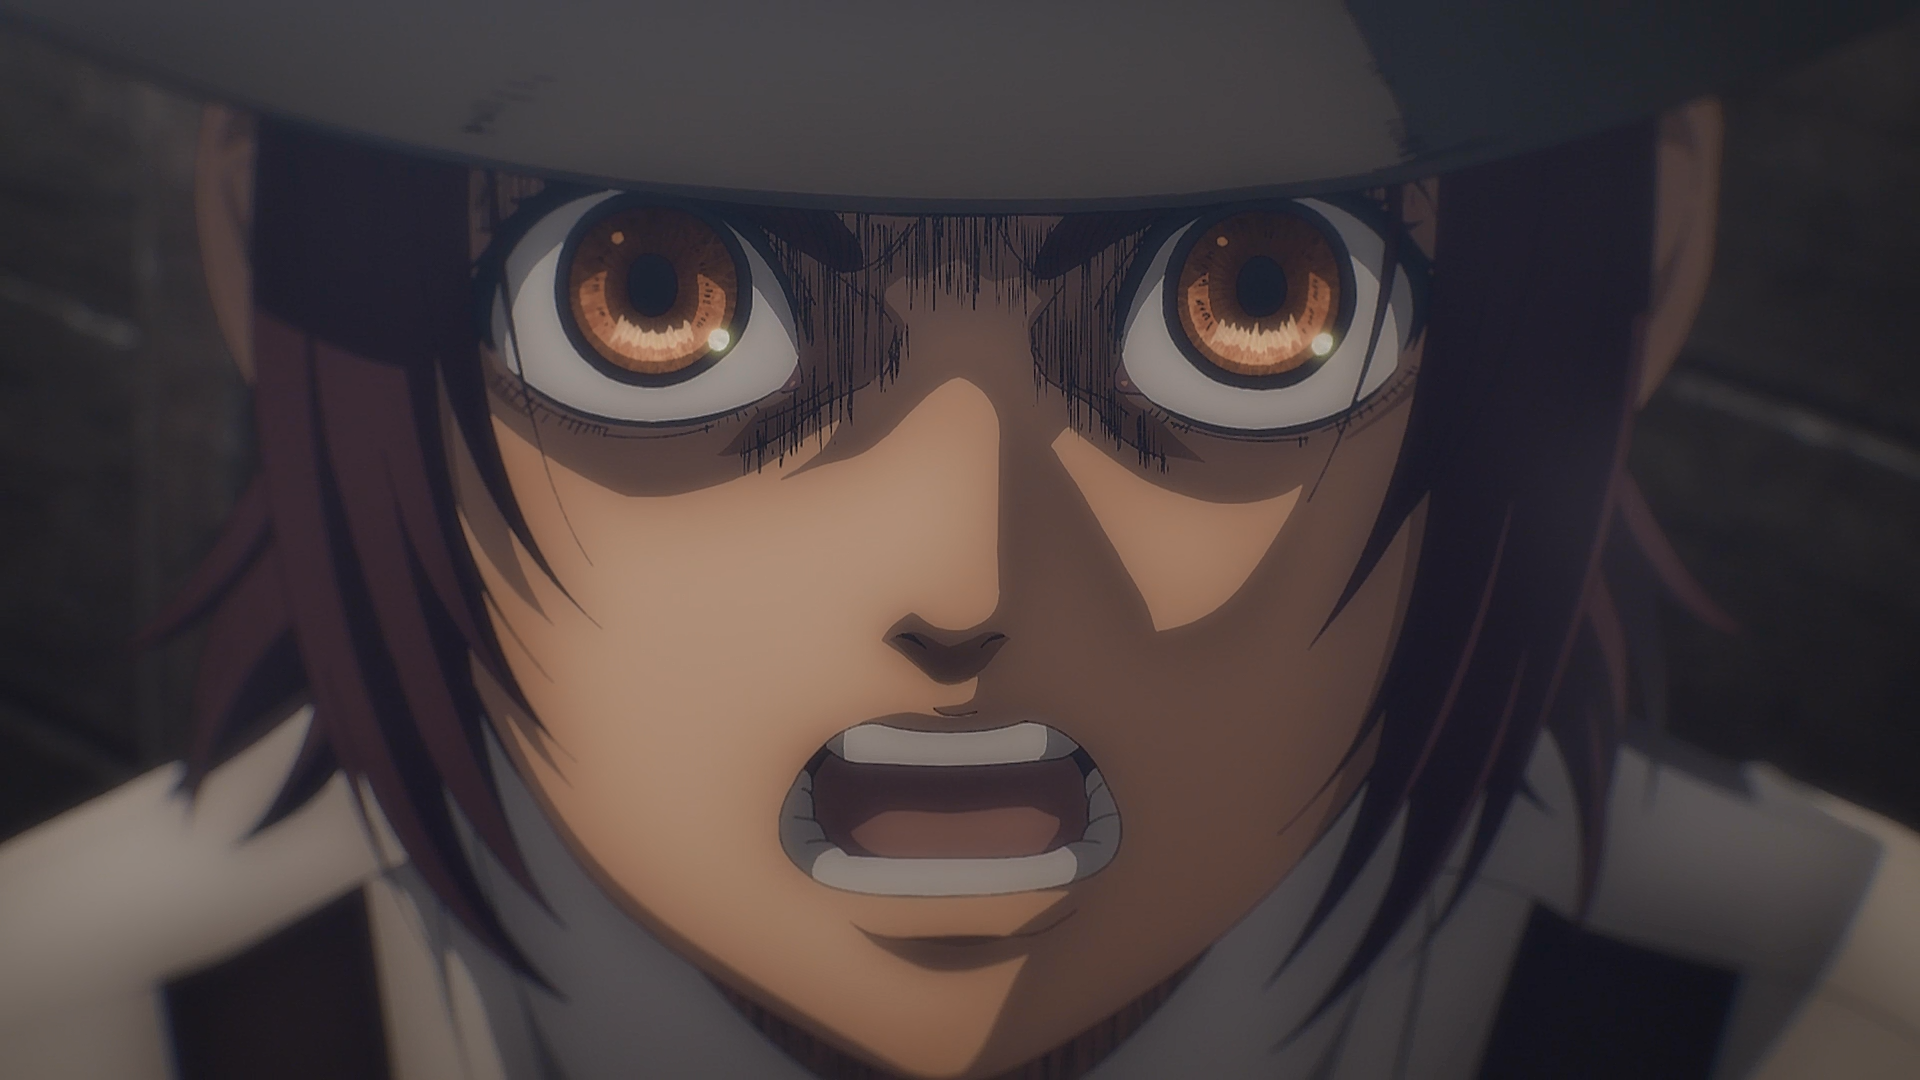 Attack on Titan': Do Gabi and Falco End Up Together in the Manga?